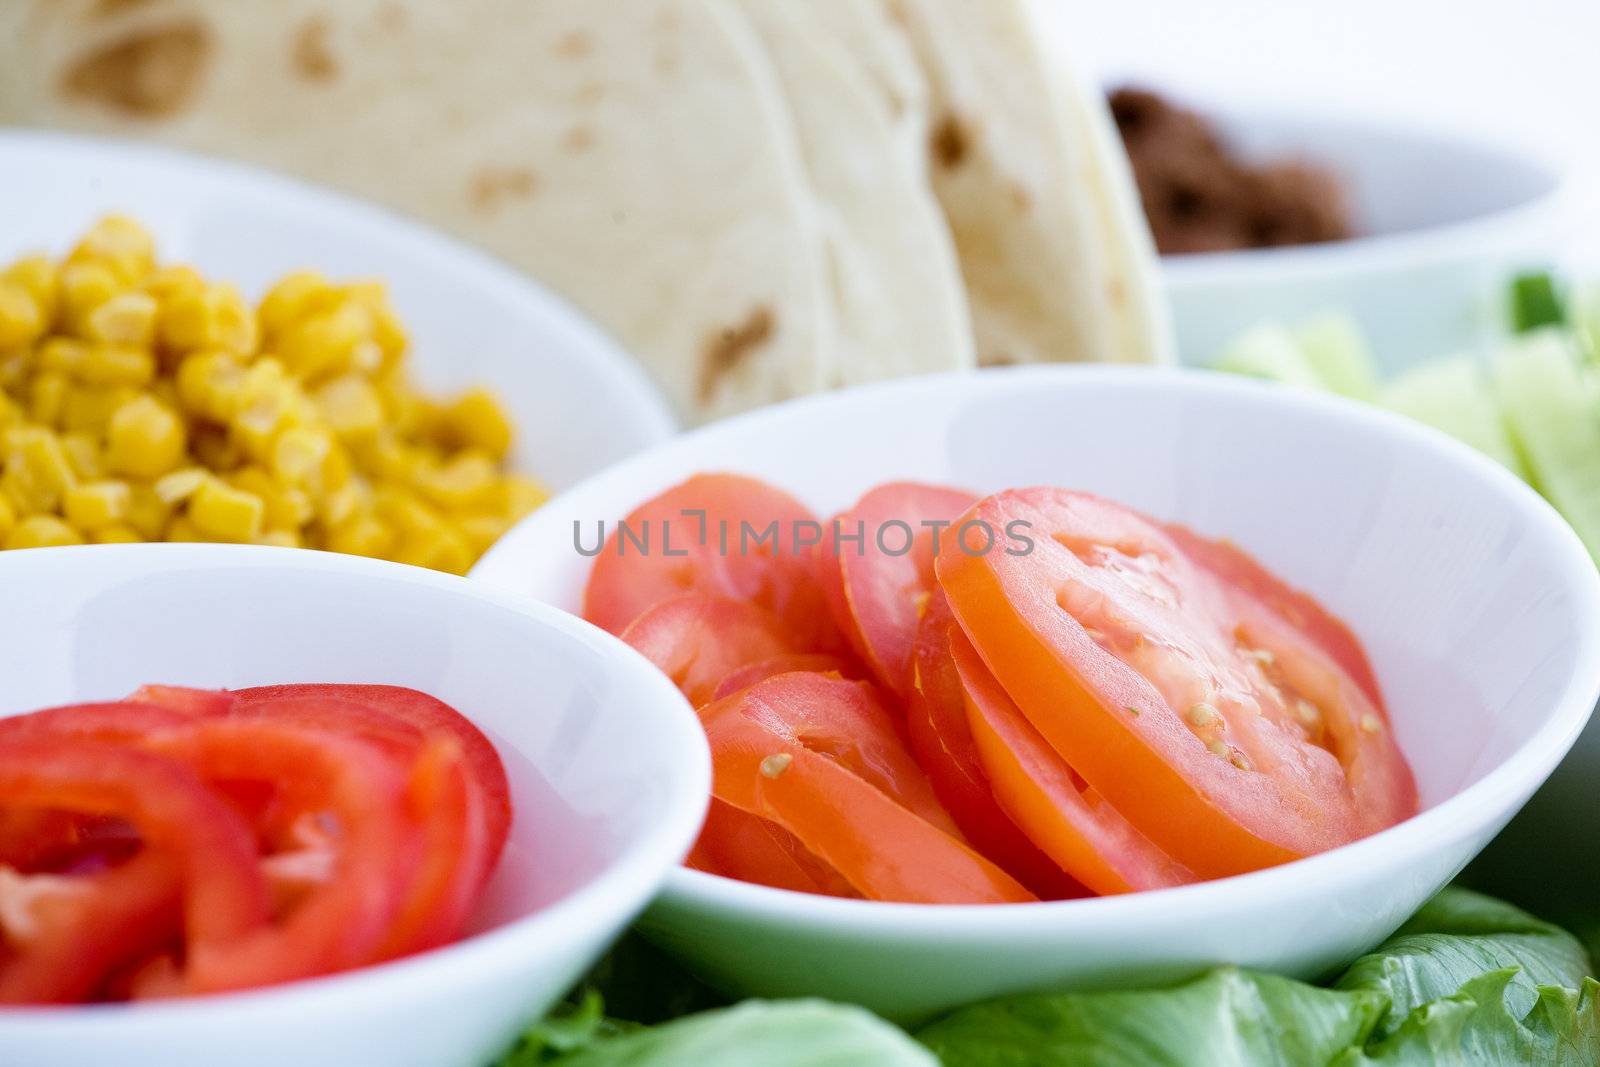 Taco ingredients - shallow depth of field with focus on the tomatoes